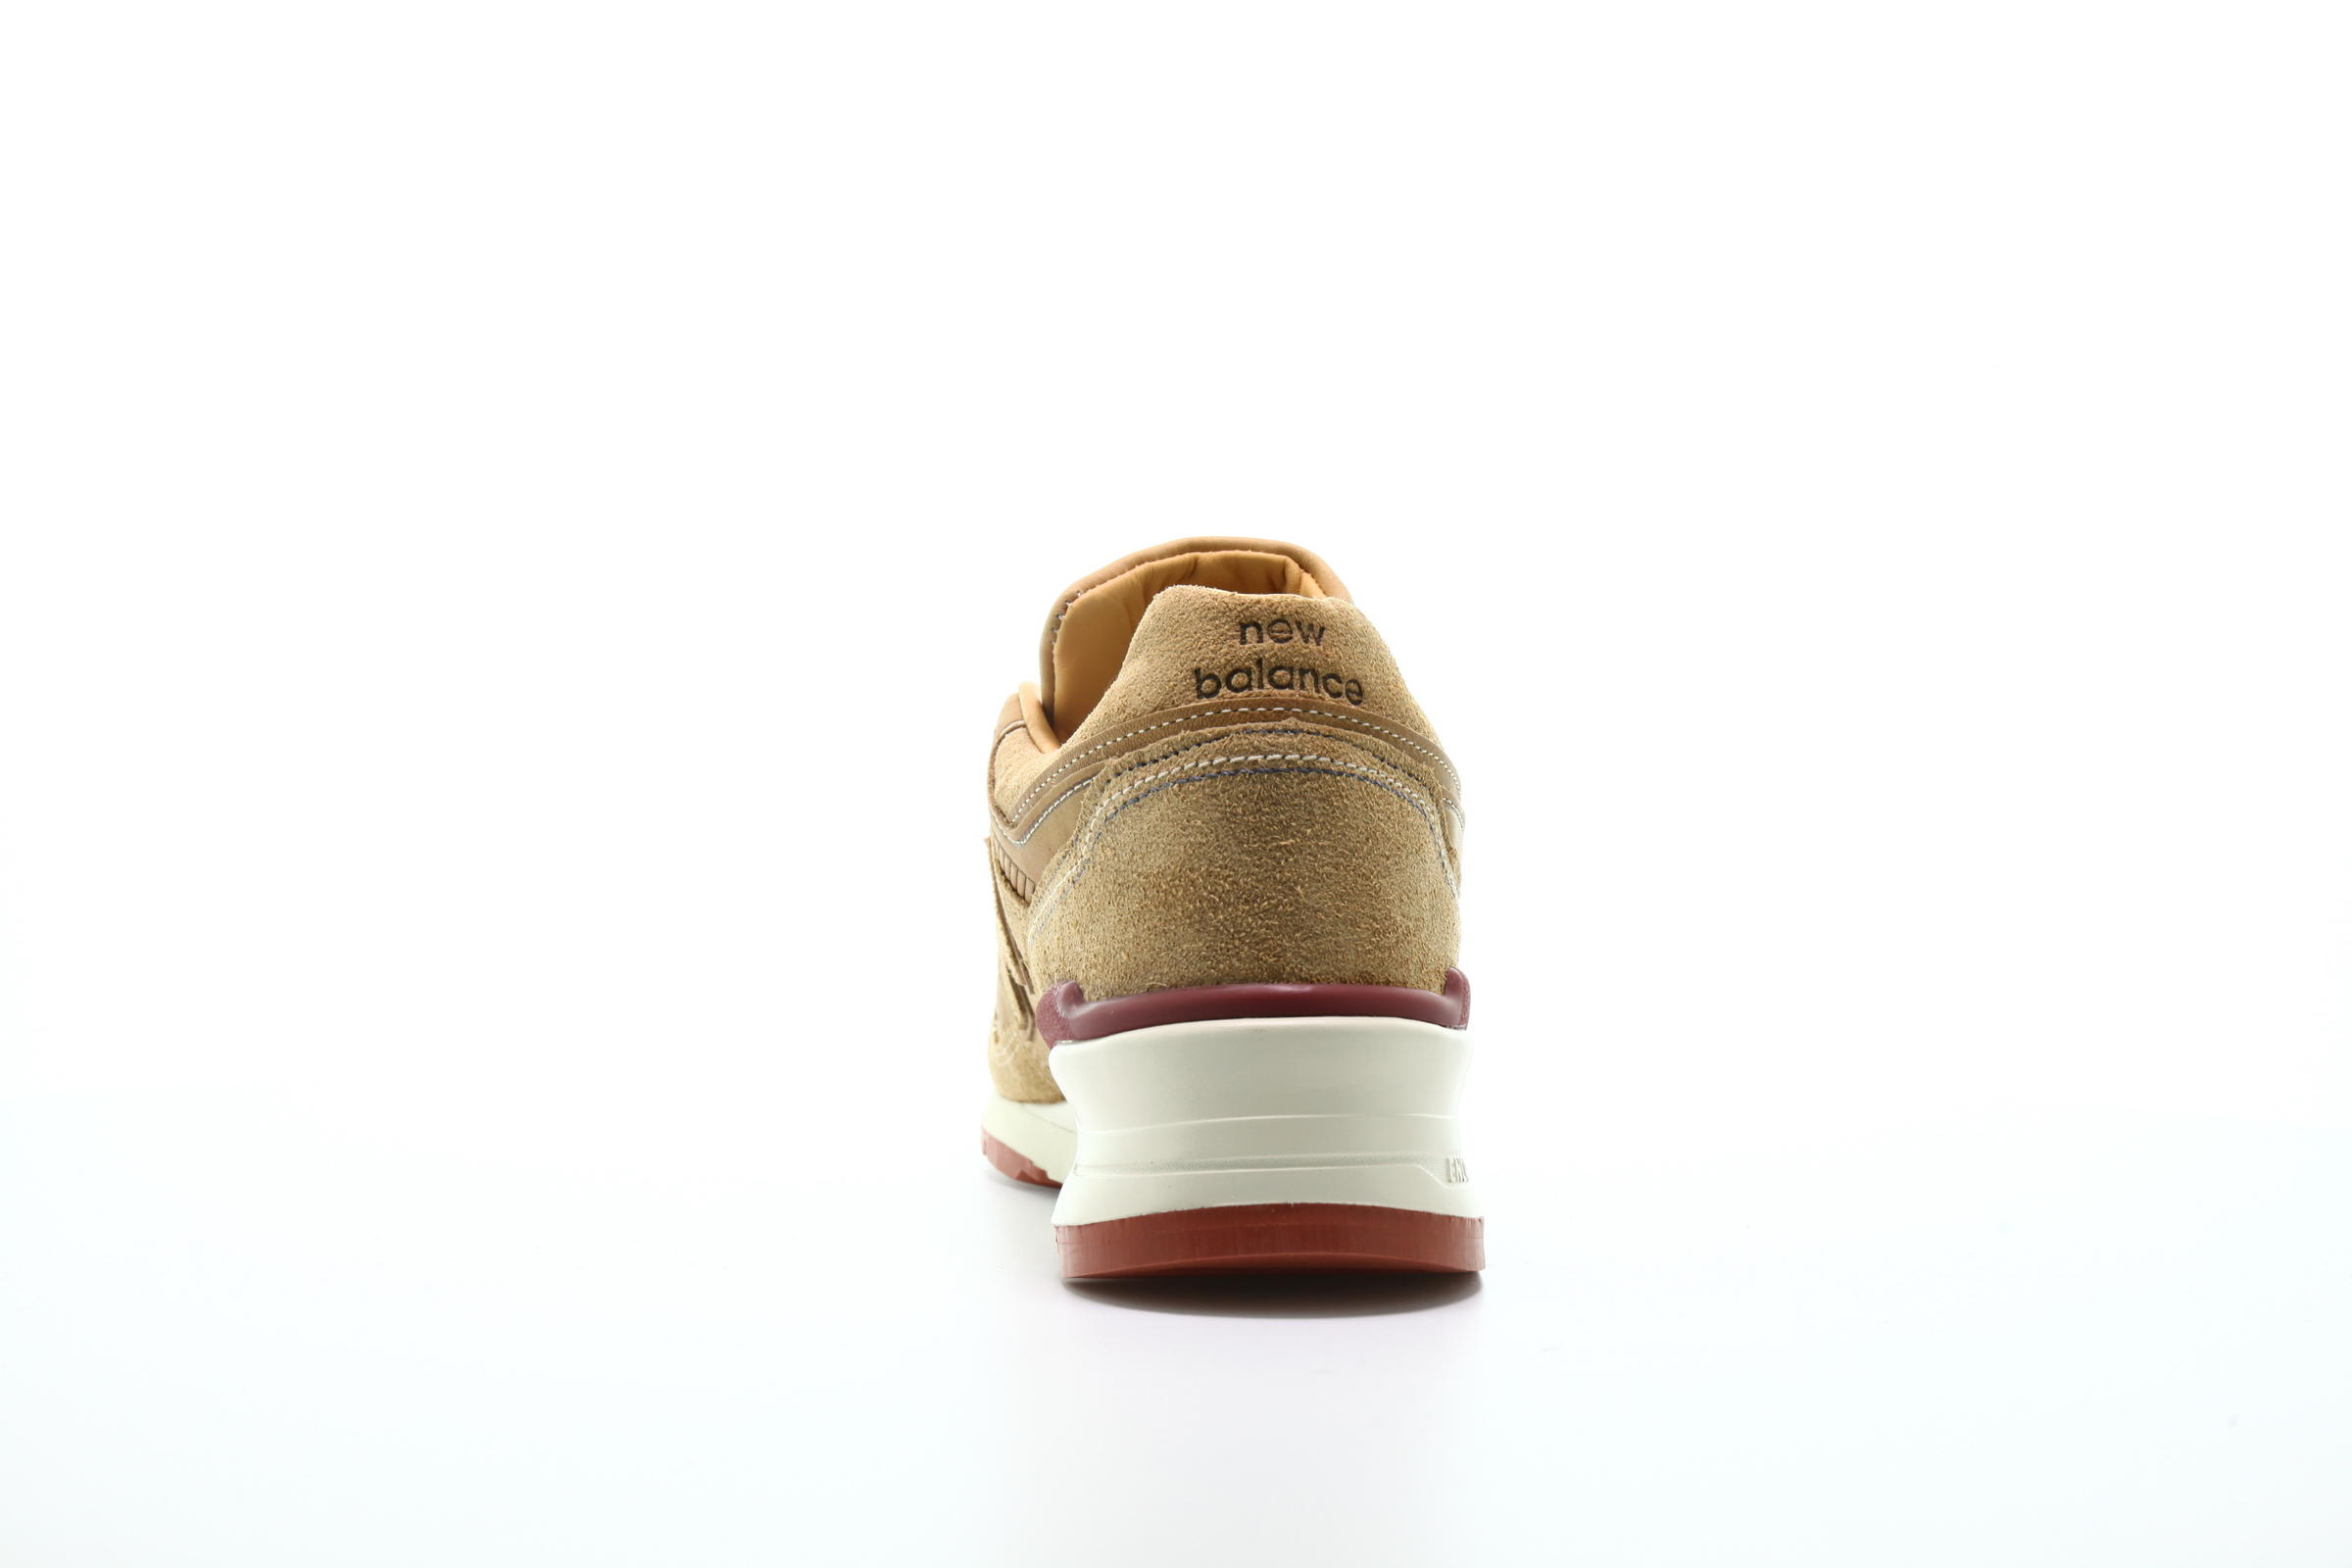 New Balance x Red Wing Shoes M 997 RW "Tan"